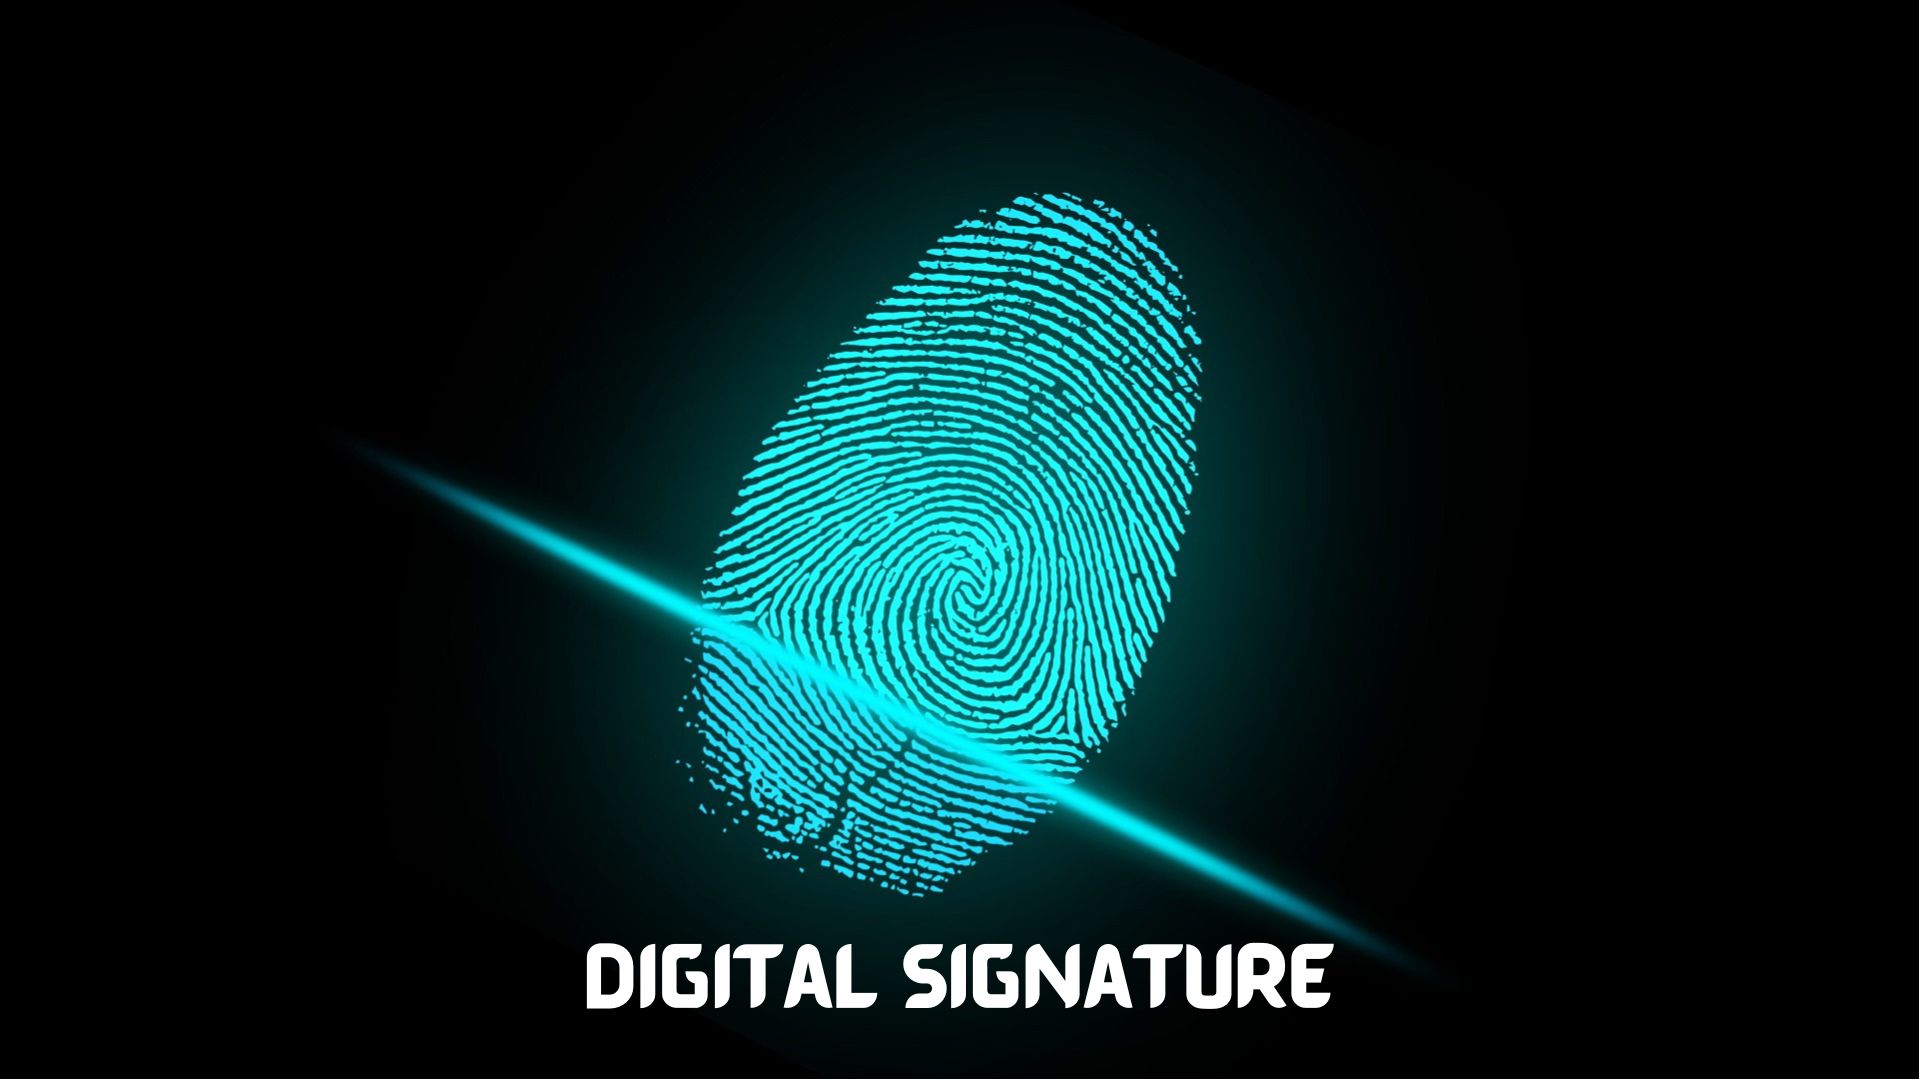 What is Digital Signature and how does Digital Signature work